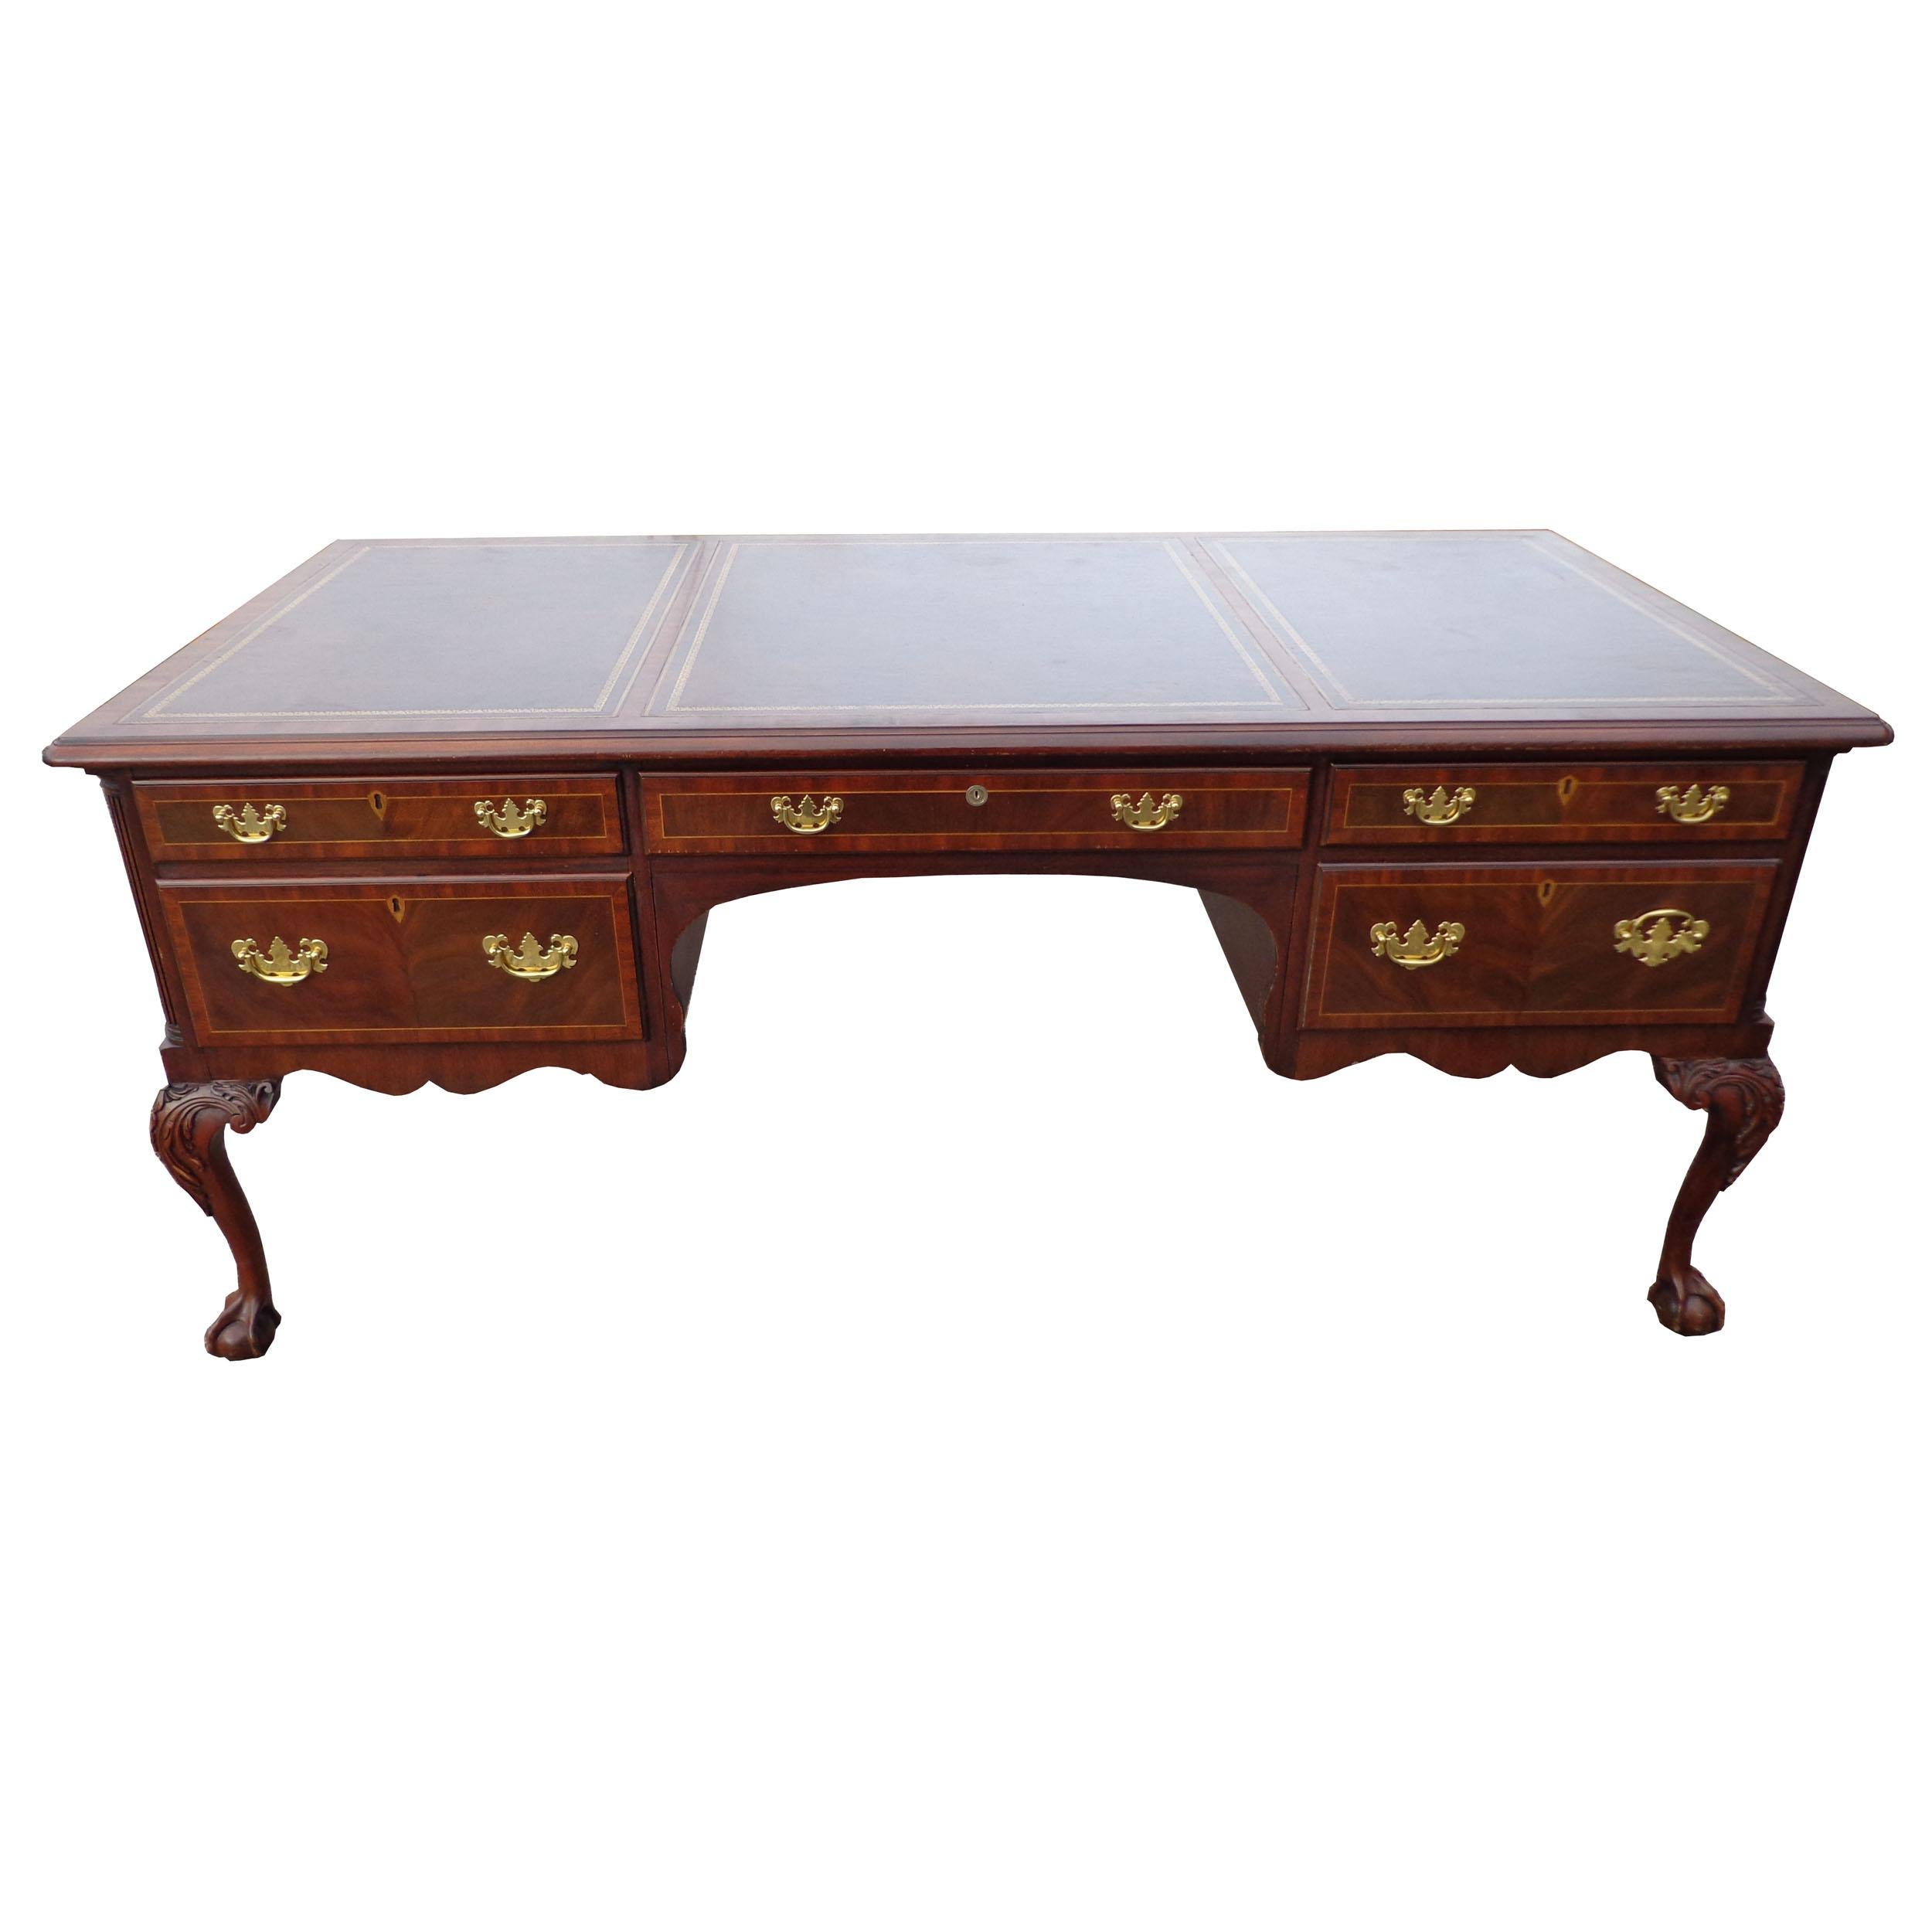 Henkel moore Chippendale mahogany leather top ball and claw executive desk

Tooled leather inlay top. Brass pulls.
Carved ball & claw feet.
6 dove tailed drawers with locking mechanism and brass pulls.
3 pull out work tablets.
Finished back